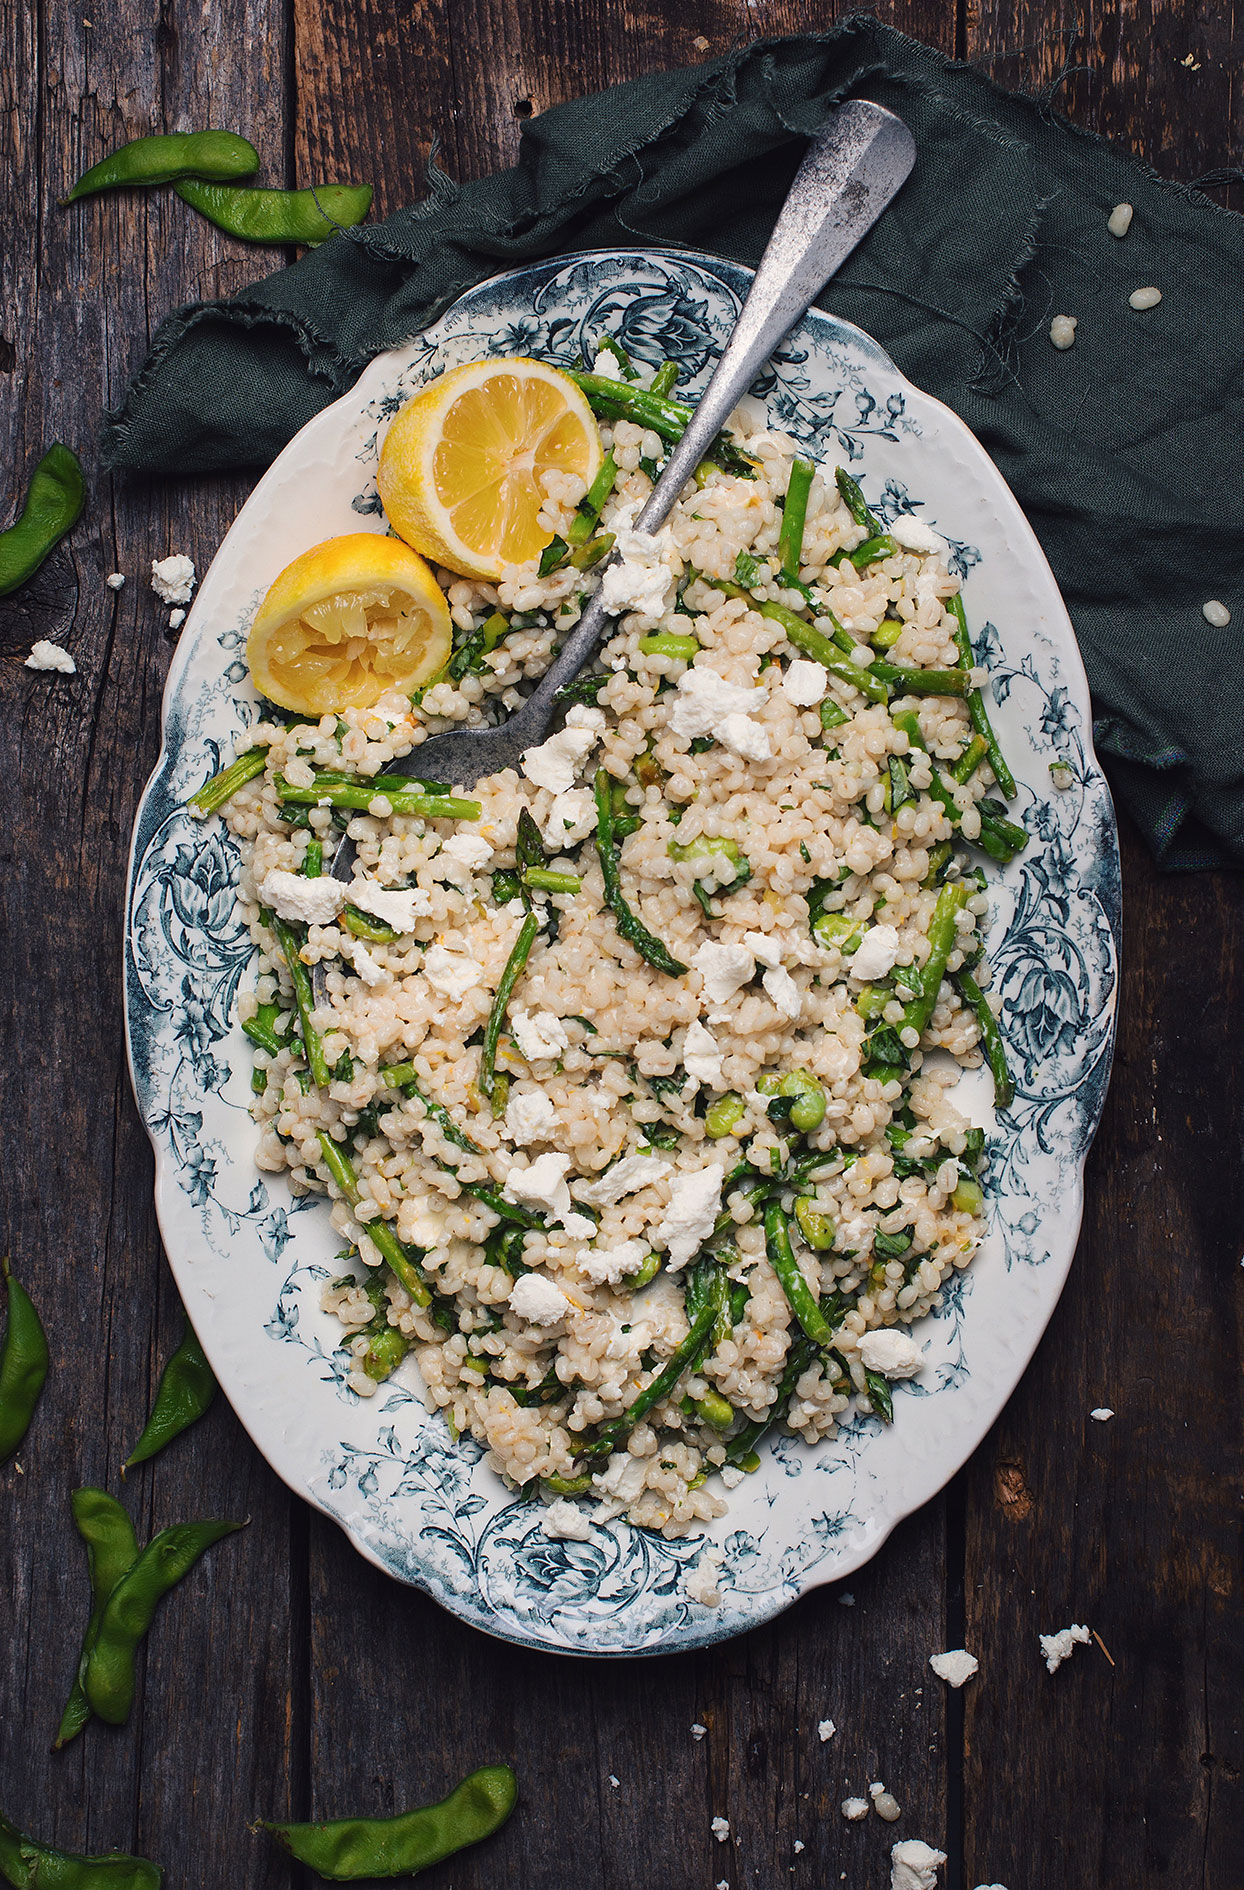 Barley salad with asparagus, edamames and goat cheese